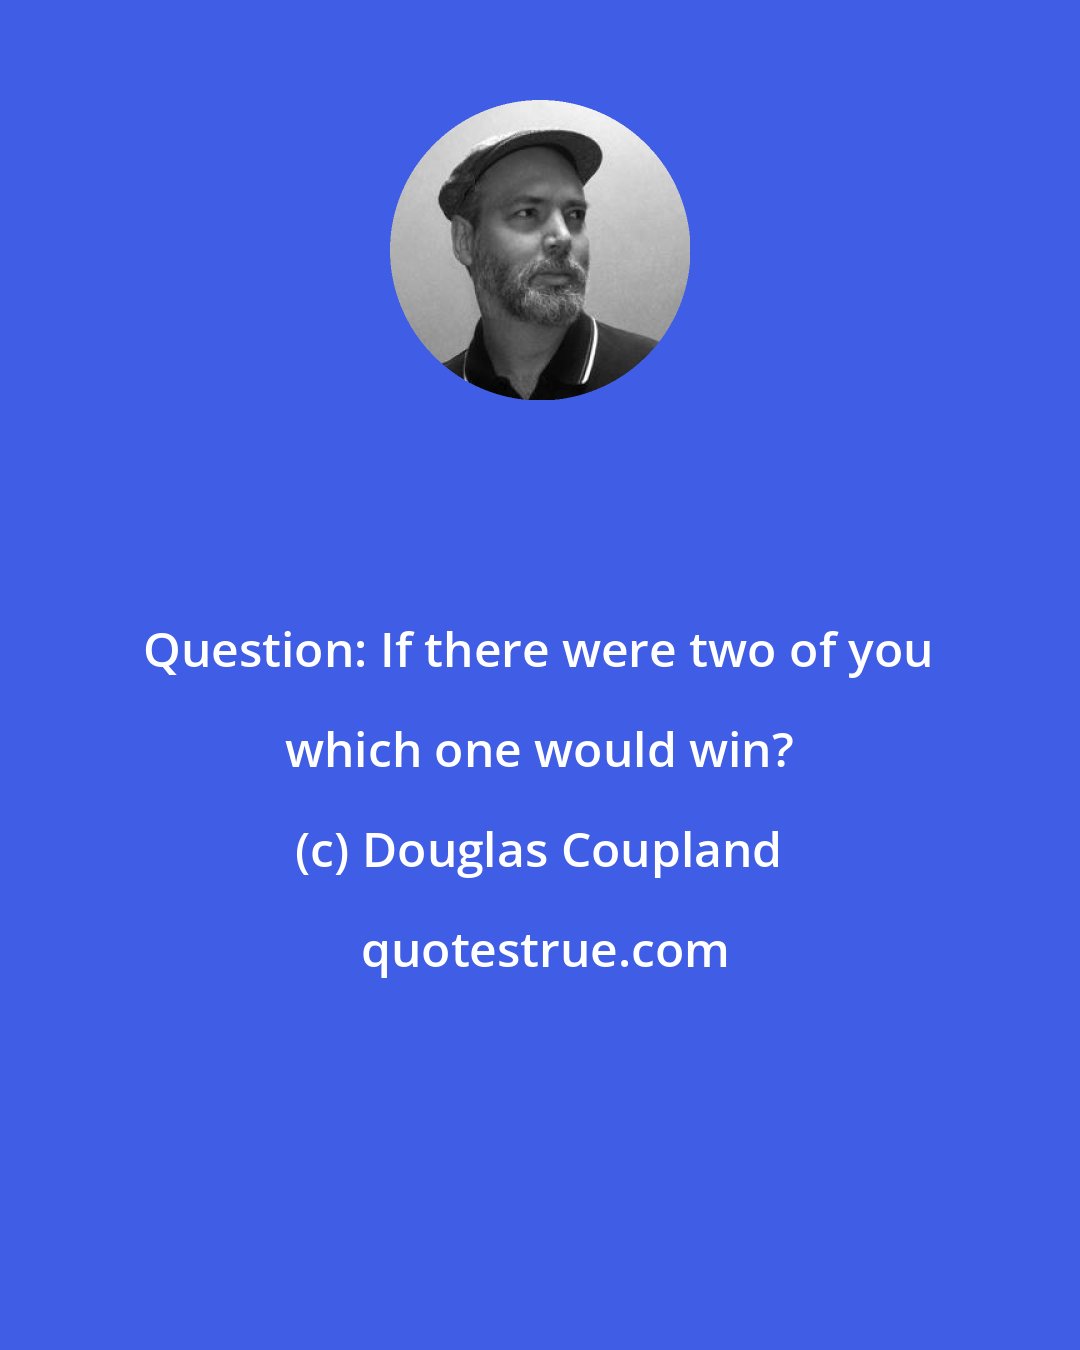 Douglas Coupland: Question: If there were two of you which one would win?